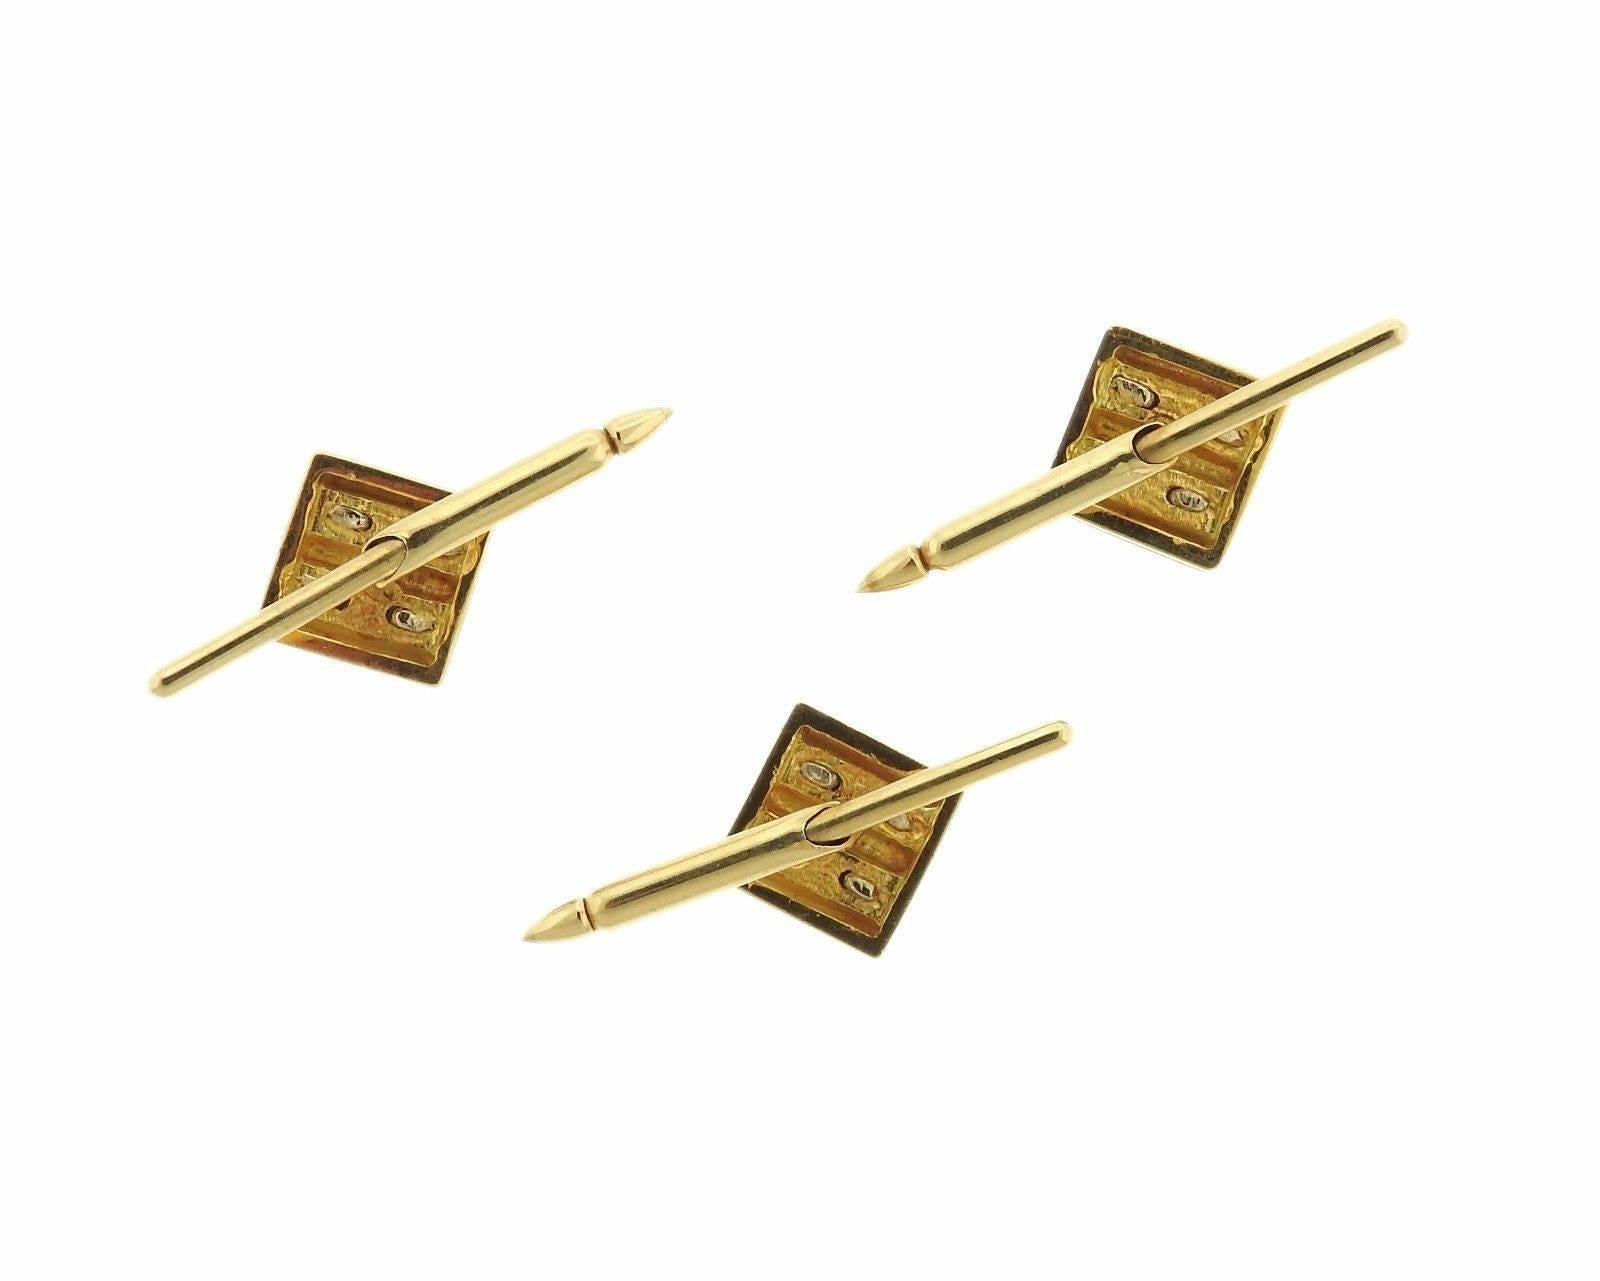 Pair of 18k two color gold cufflinks and studs. Cufflink top measures 16mm x 14mm,  stud top measures 9mm x 10mm . Weight: 31.2 grams 